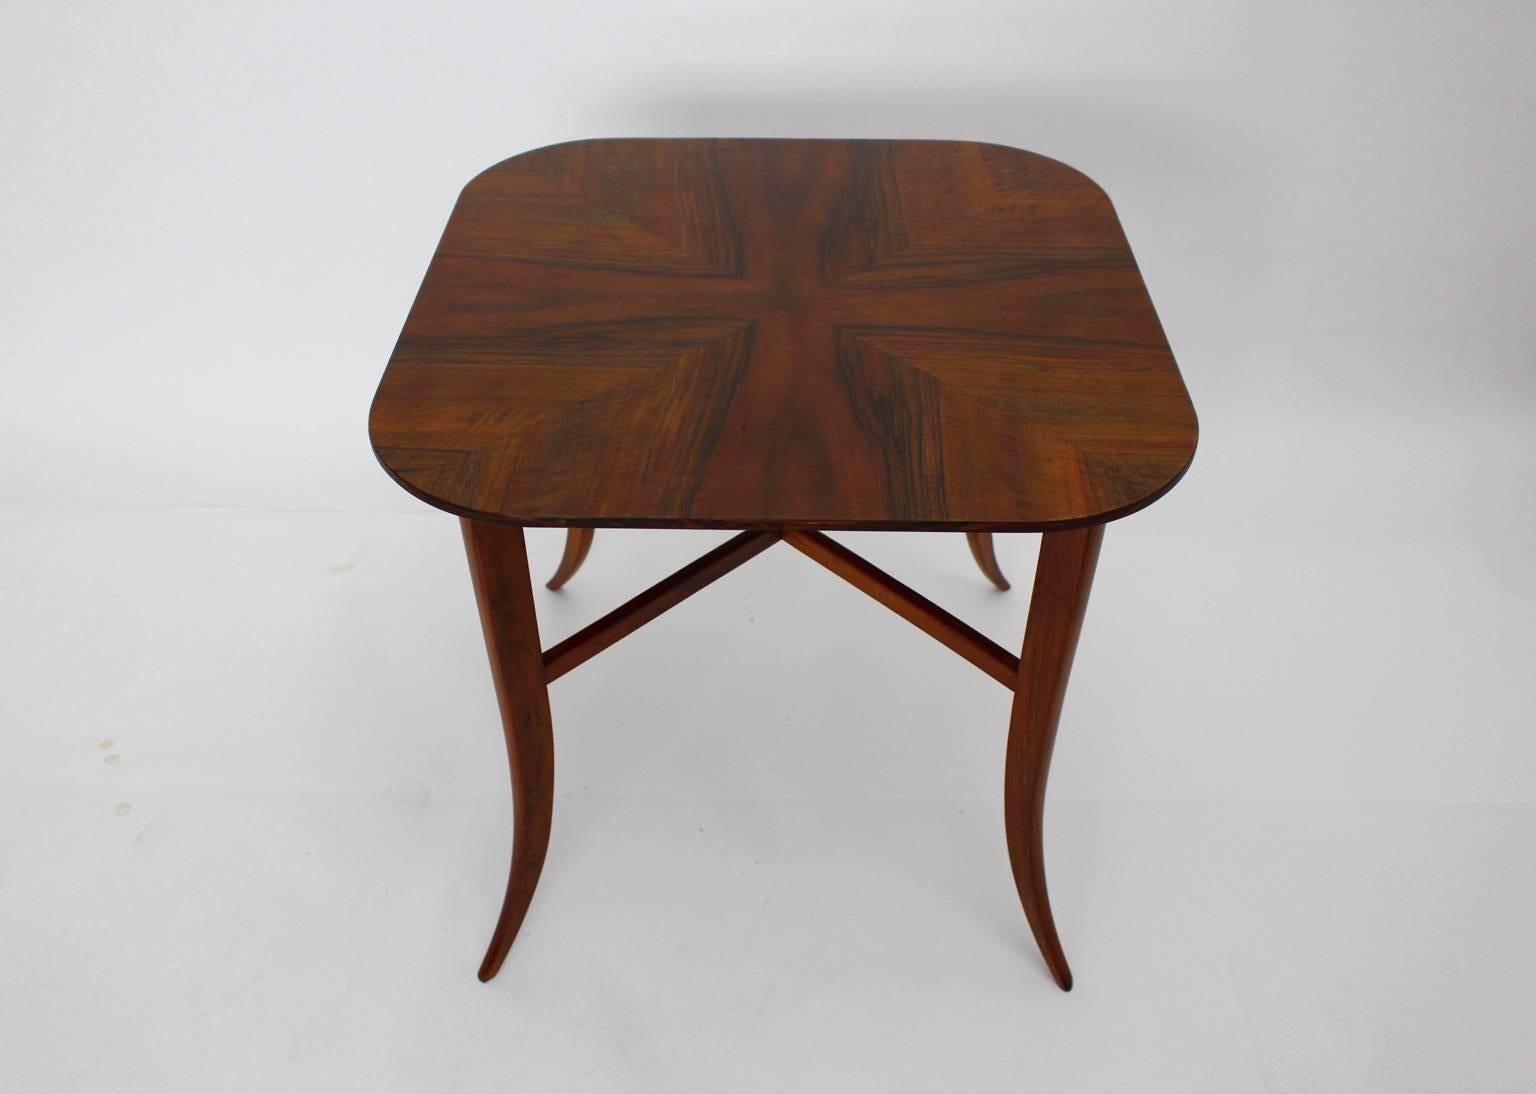 Polished Art Deco Vintage Walnut Coffee Table or Side Table by Josef Frank, 1930s, Vienna For Sale